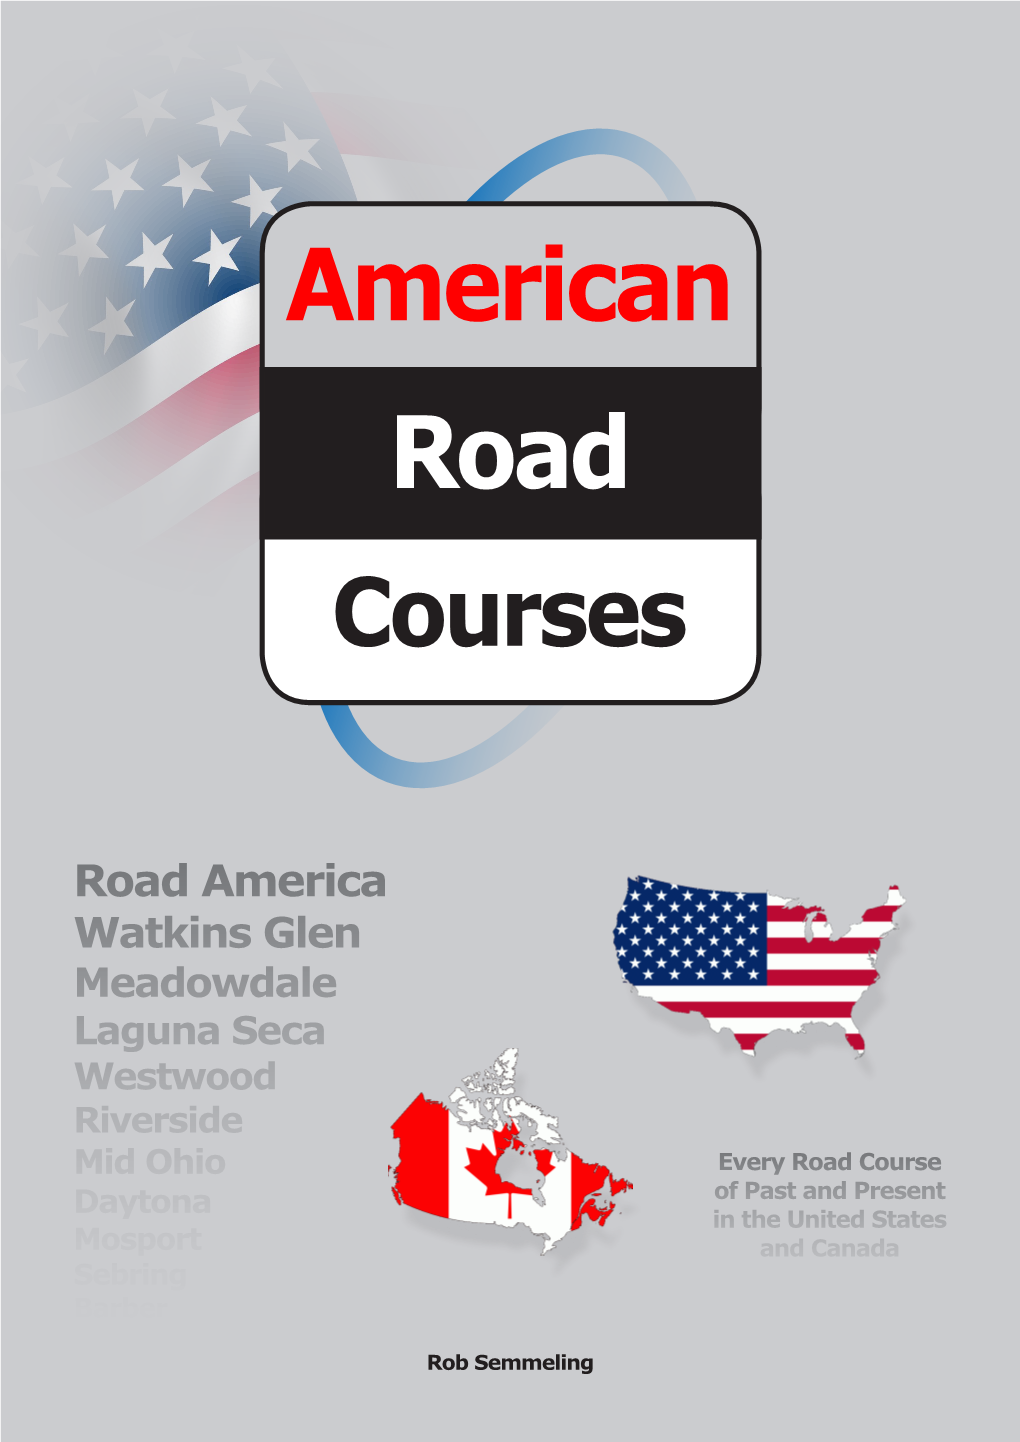 American Road Courses